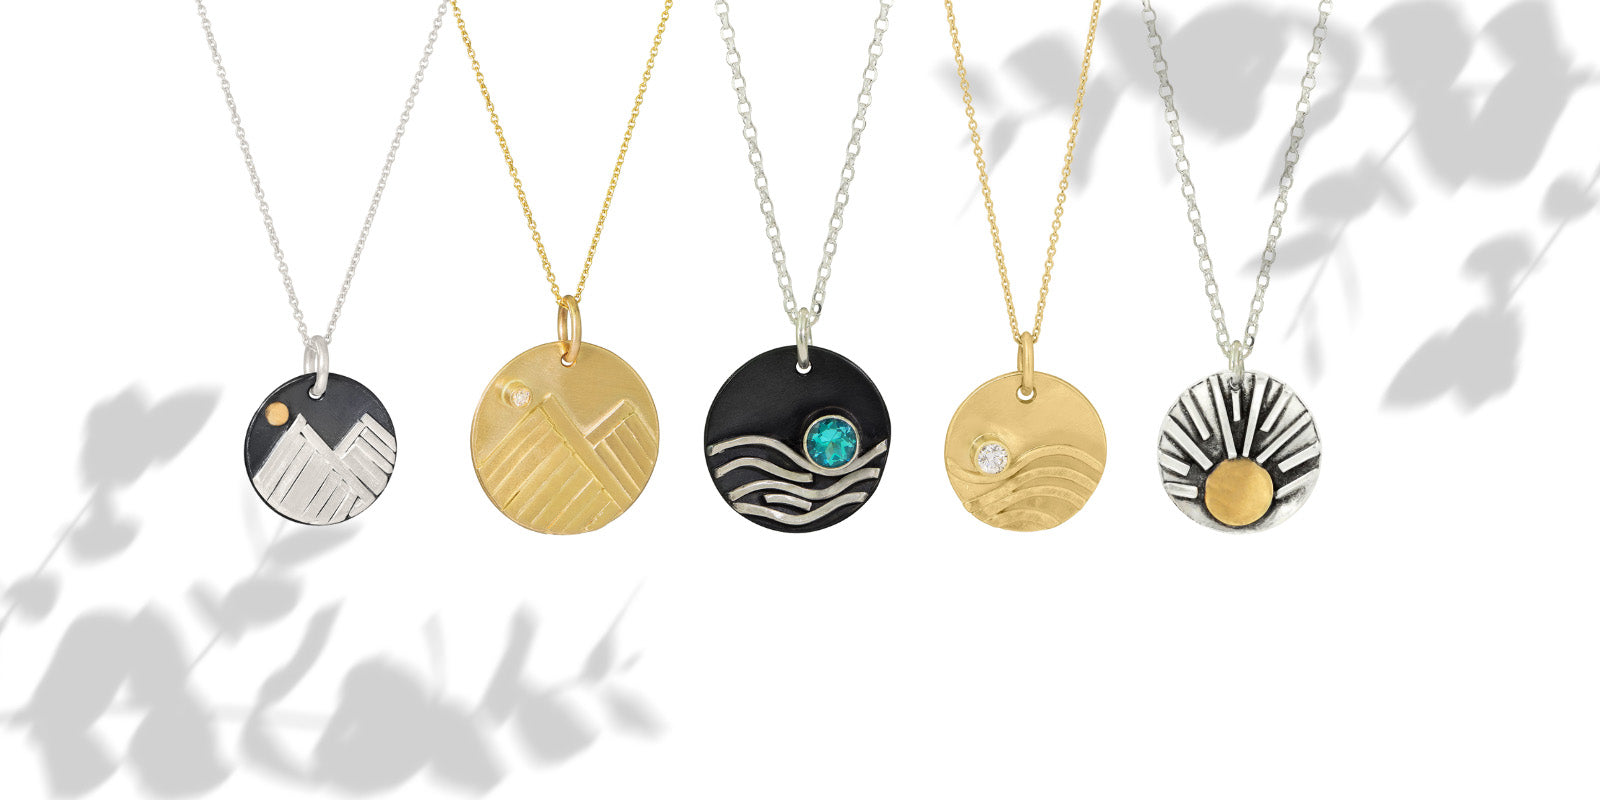 Mountain, Wave, and Sun Jewelry by Jen Lesea Designs